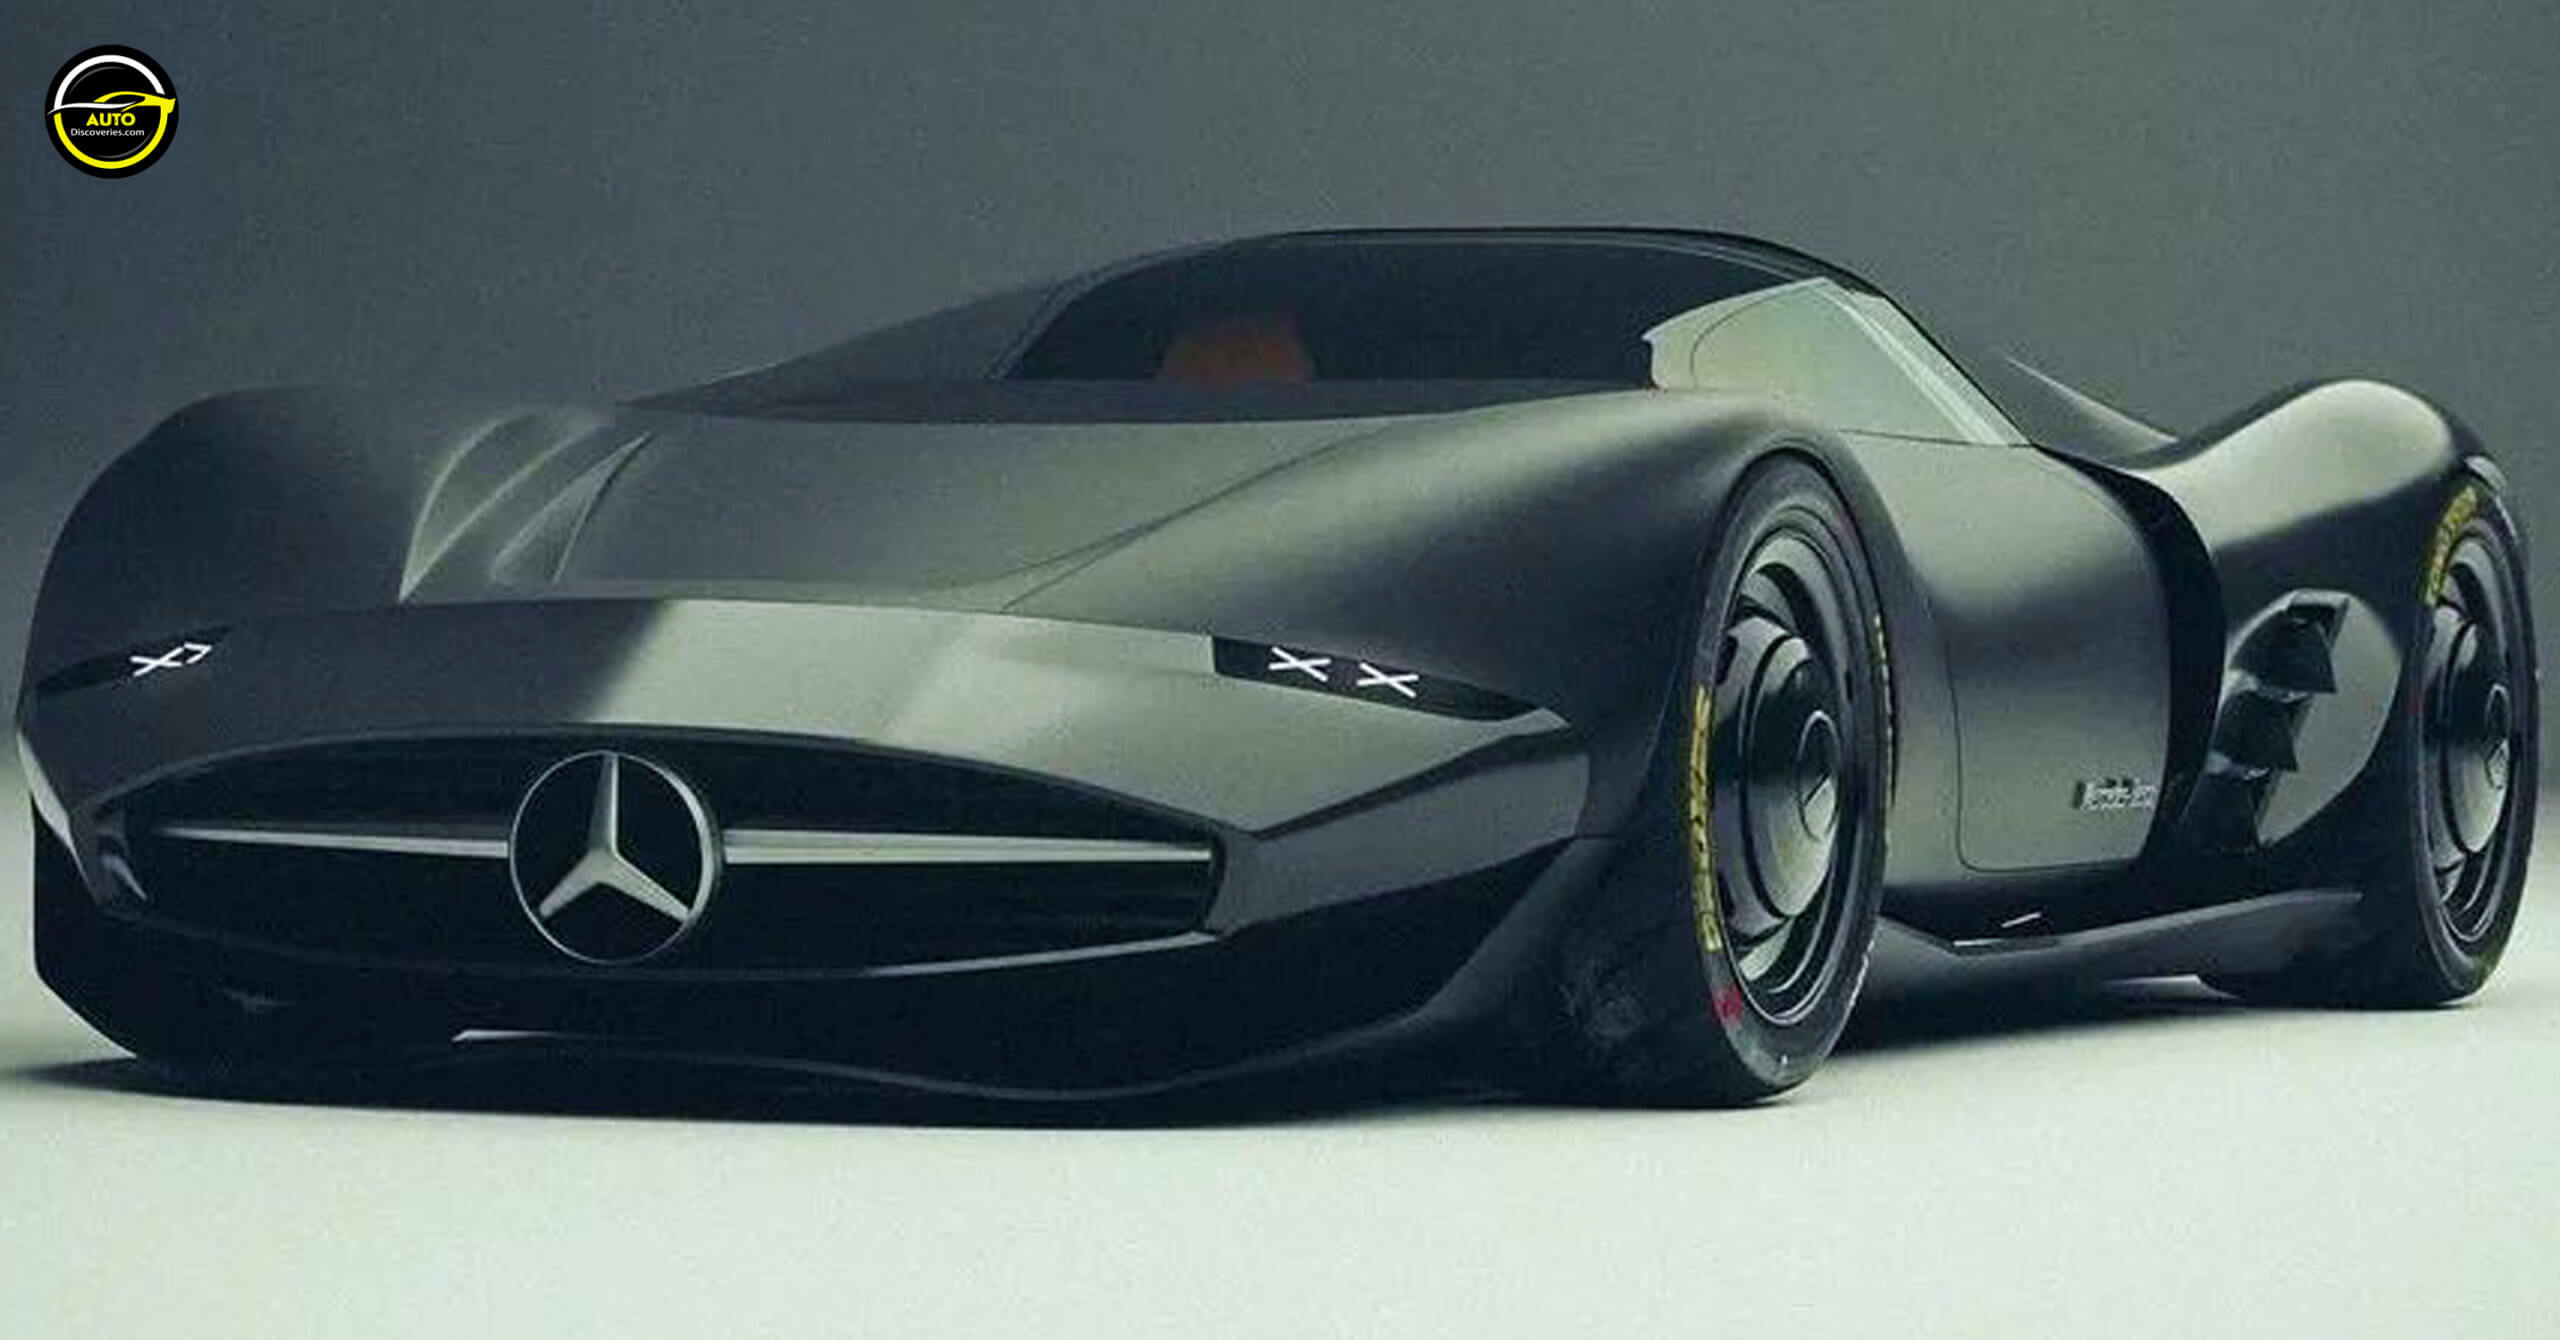 Mercedes Benz Concept Designed by Al Yasid scaled